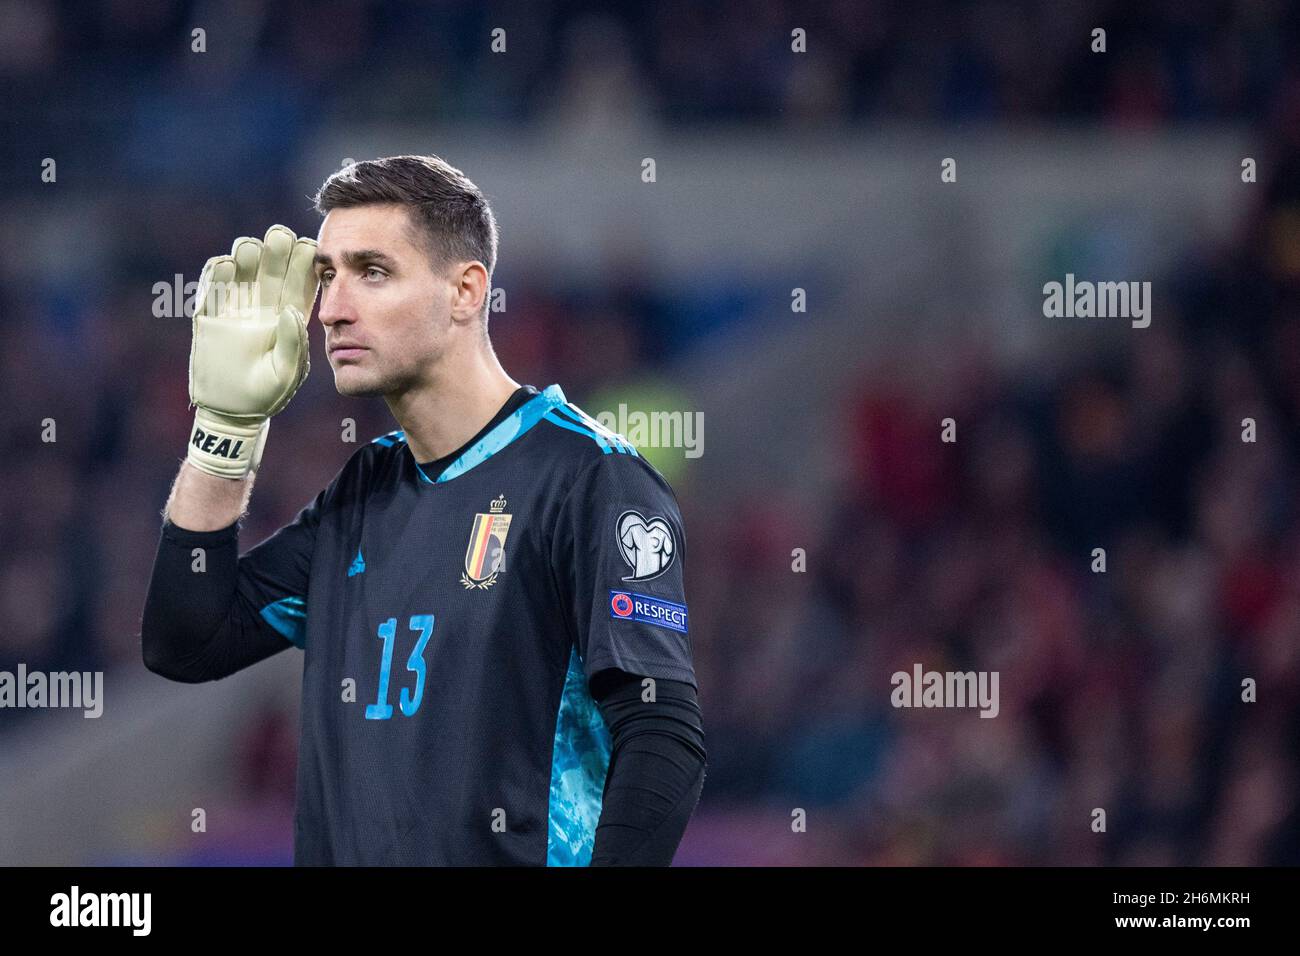 Cardiff, Wales, UK. 16th Nov, 2021. Koen Casteels of Belgium during the World Cup 2022 group qualification match between Wales and Belgium at the Cardiff City Stadium. Credit: Mark Hawkins/Alamy Live News Stock Photo